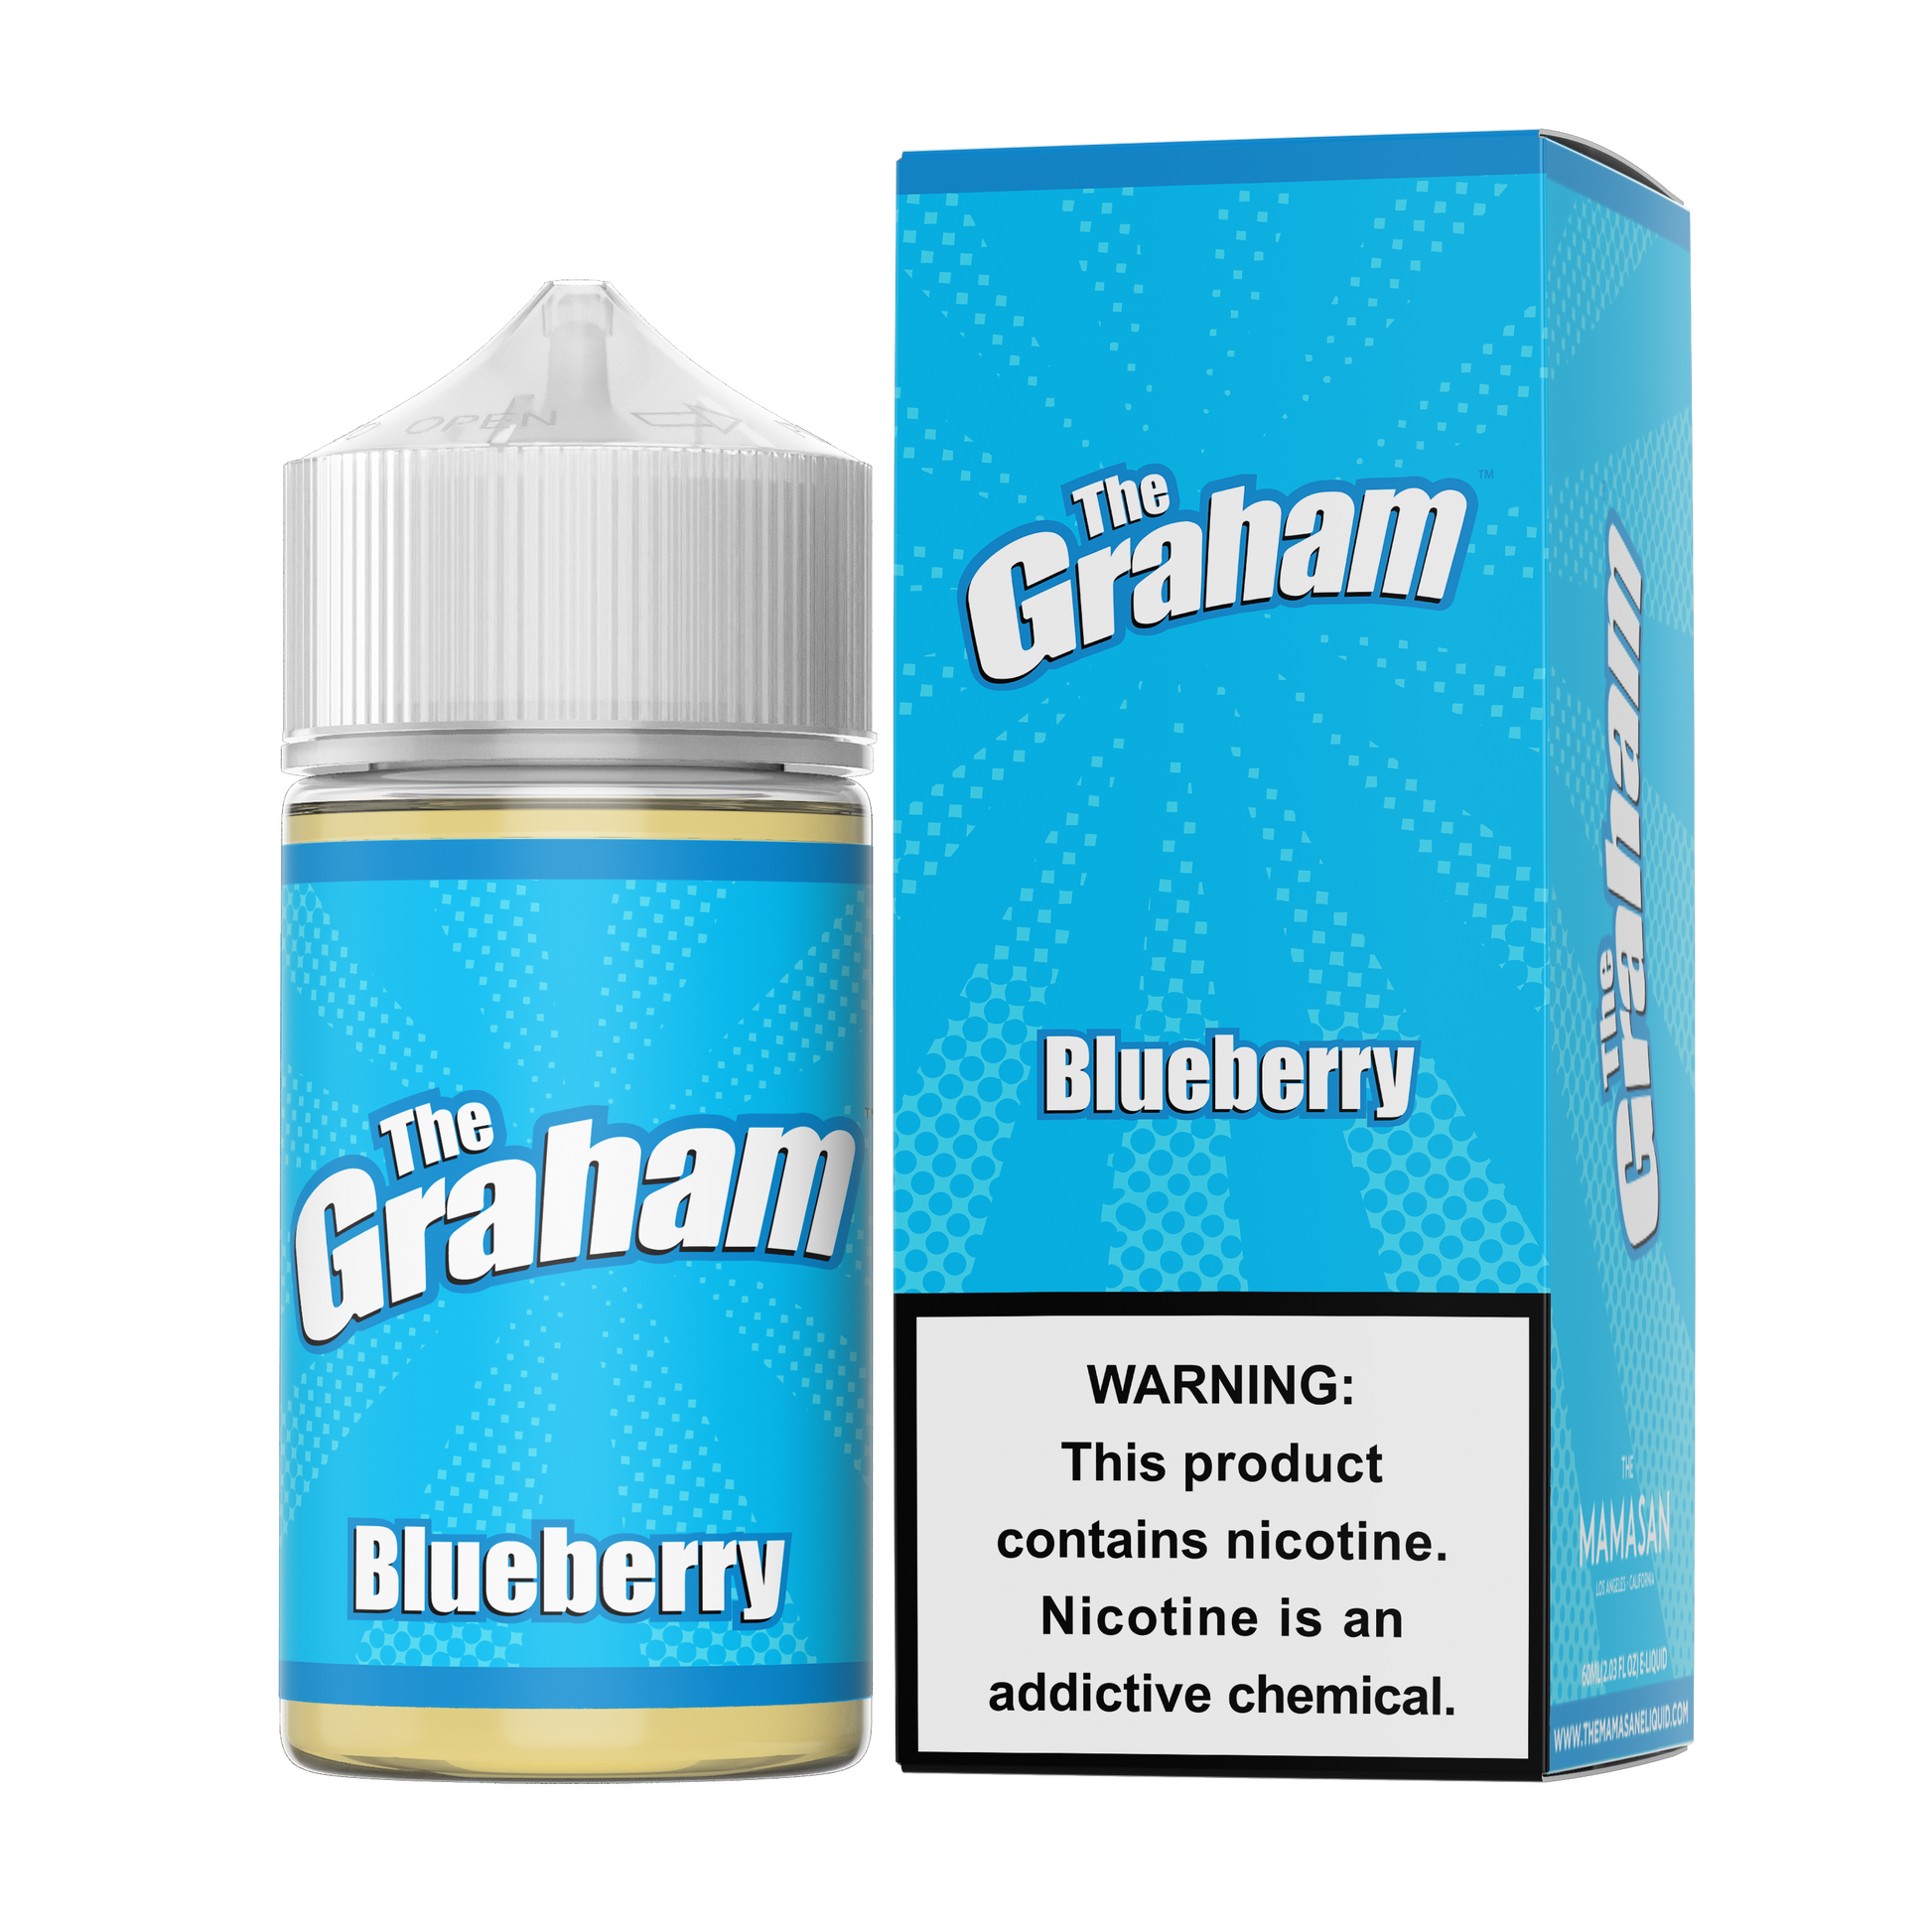 The Graham Series E-Liquid 60mL Blueberry with packaging